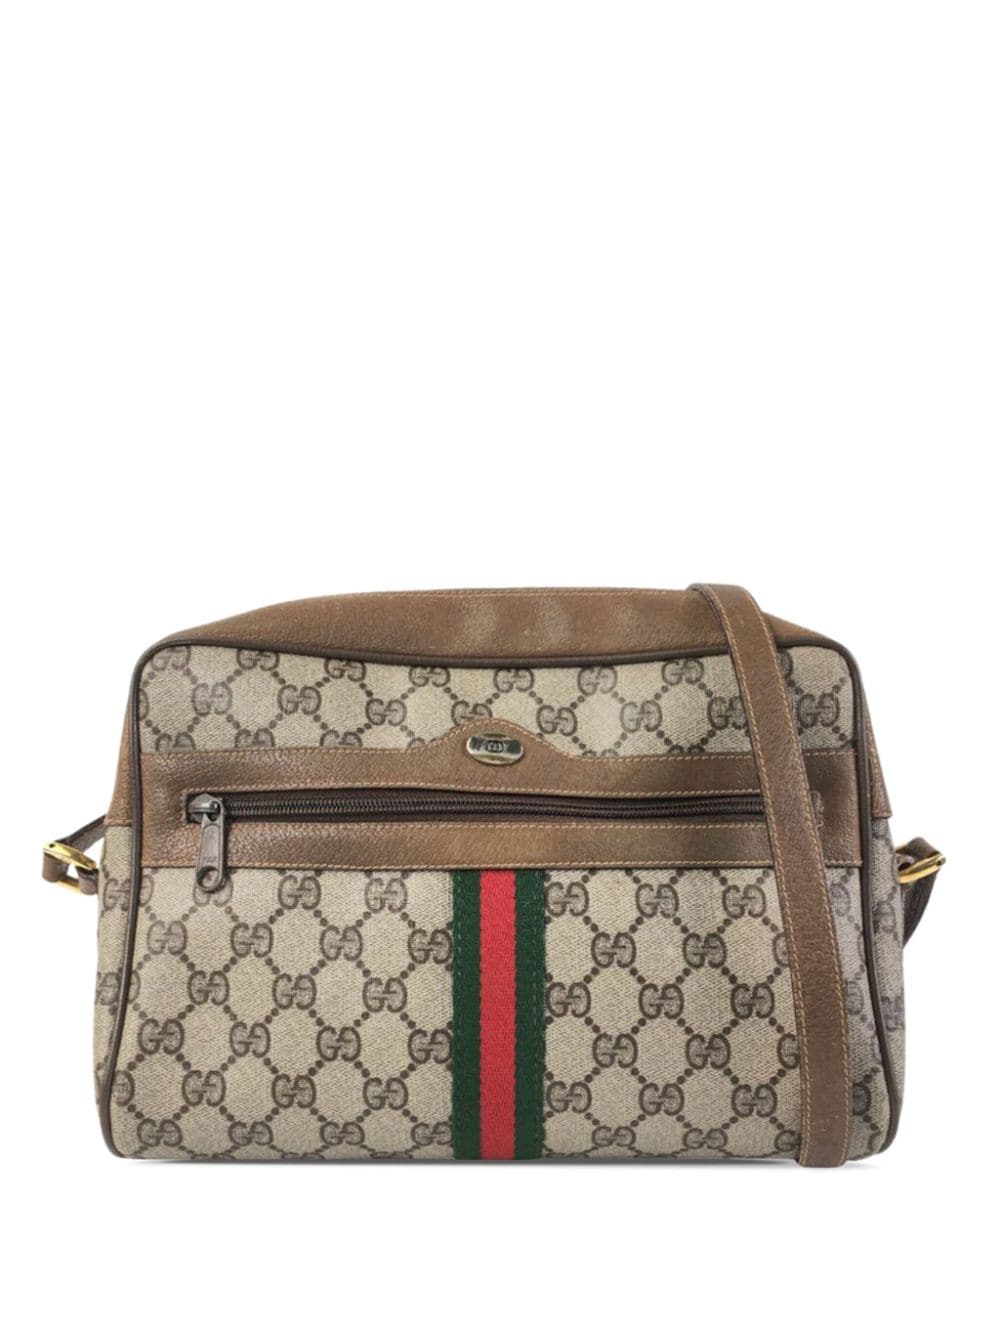 Pre-owned Gucci 2000-2010 Gg Supreme Ophidia Crossbody Bag In 褐色